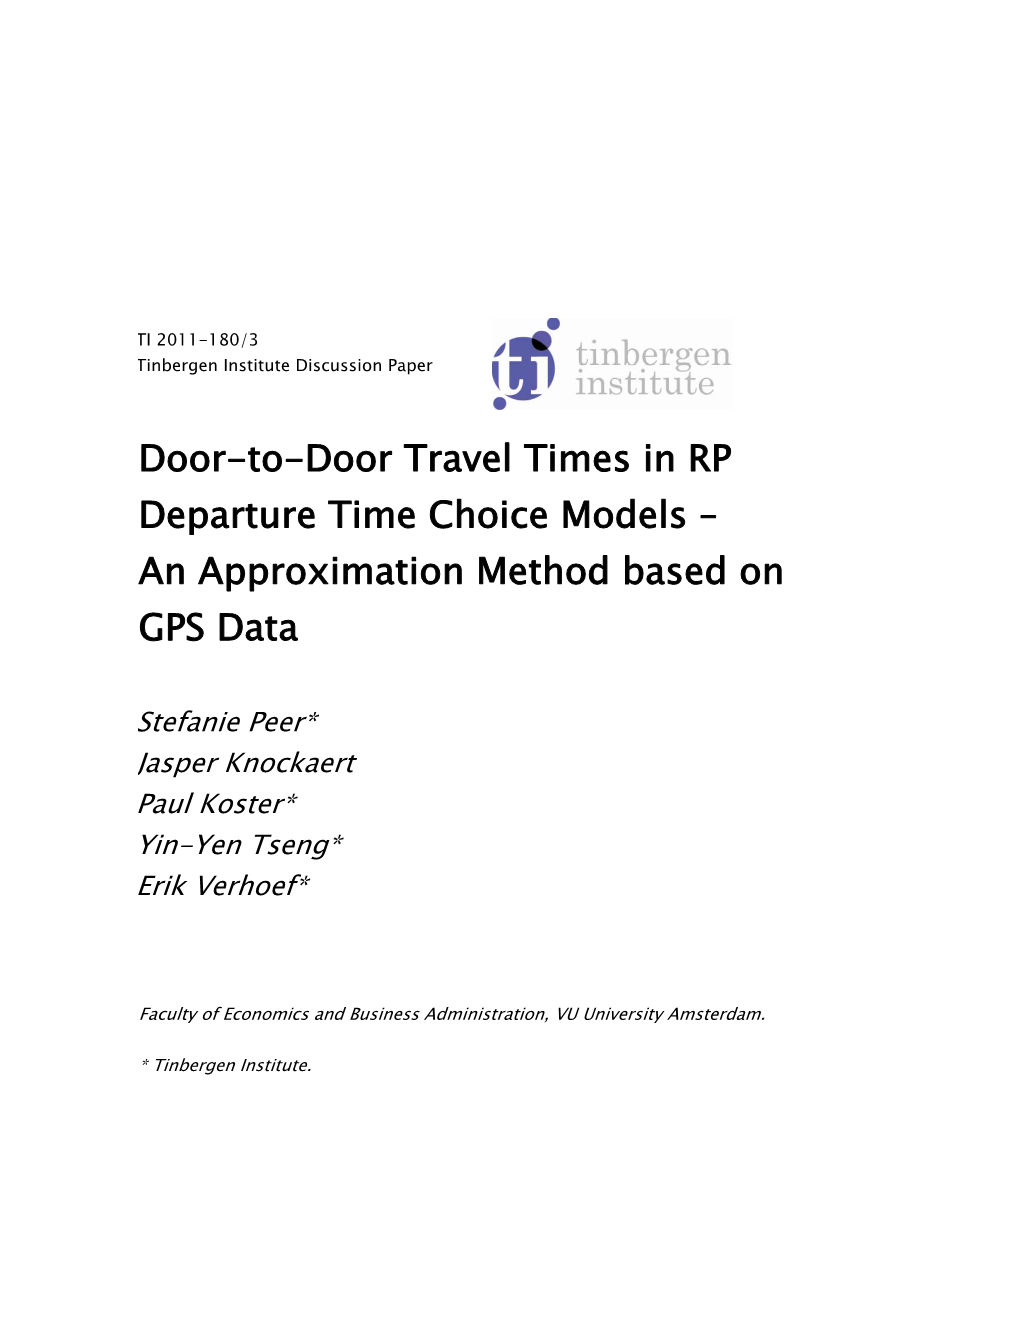 Door-To-Door Travel Times in RP Departure Time Choice Models – an Approximation Method Based on GPS Data